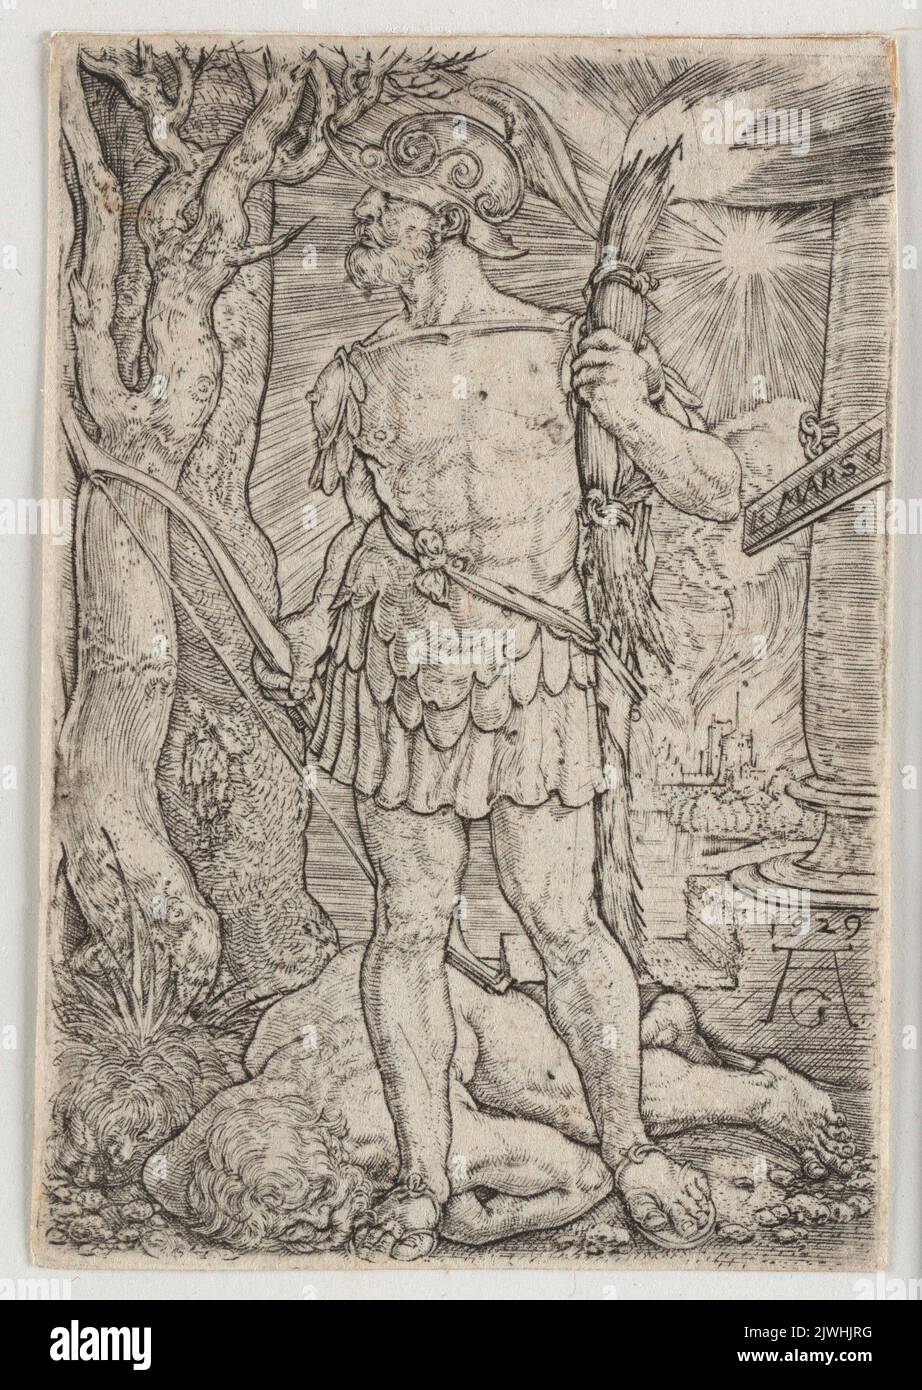 Mars - The Patron Gods of the Planets cycle. Aldegrever, Heinrich (1502-1555/1561), graphic artist Stock Photo